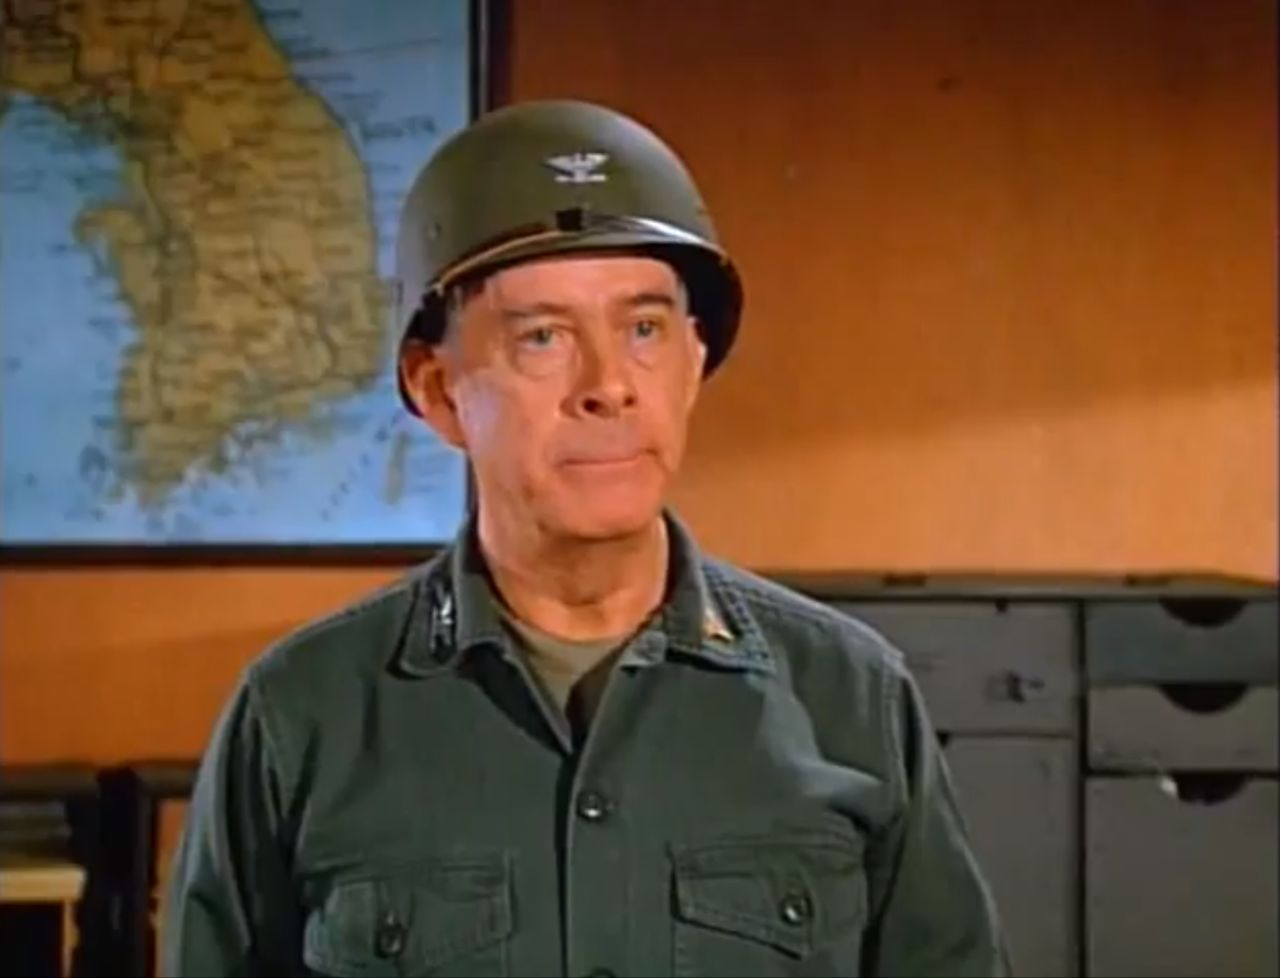 Emmy-winning "M-A-S-H" star Harry Morgan died December 7 after battling pneumonia. He was 96. Morgan starred in more than 100 movies and also made his way to Broadway.